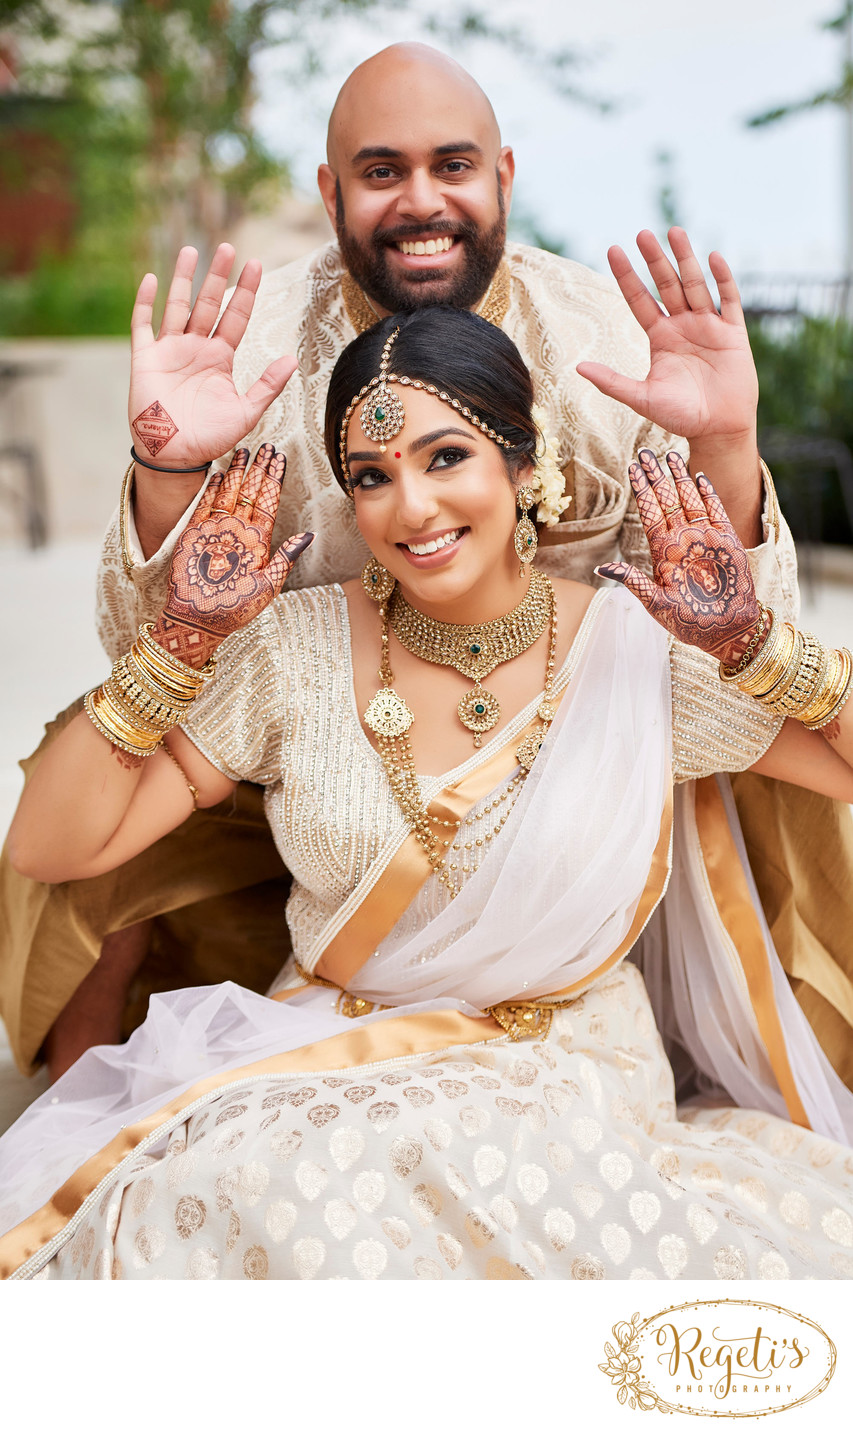 Indian And South Asian Indian Destination Wedding Photographers Dc Regeti S